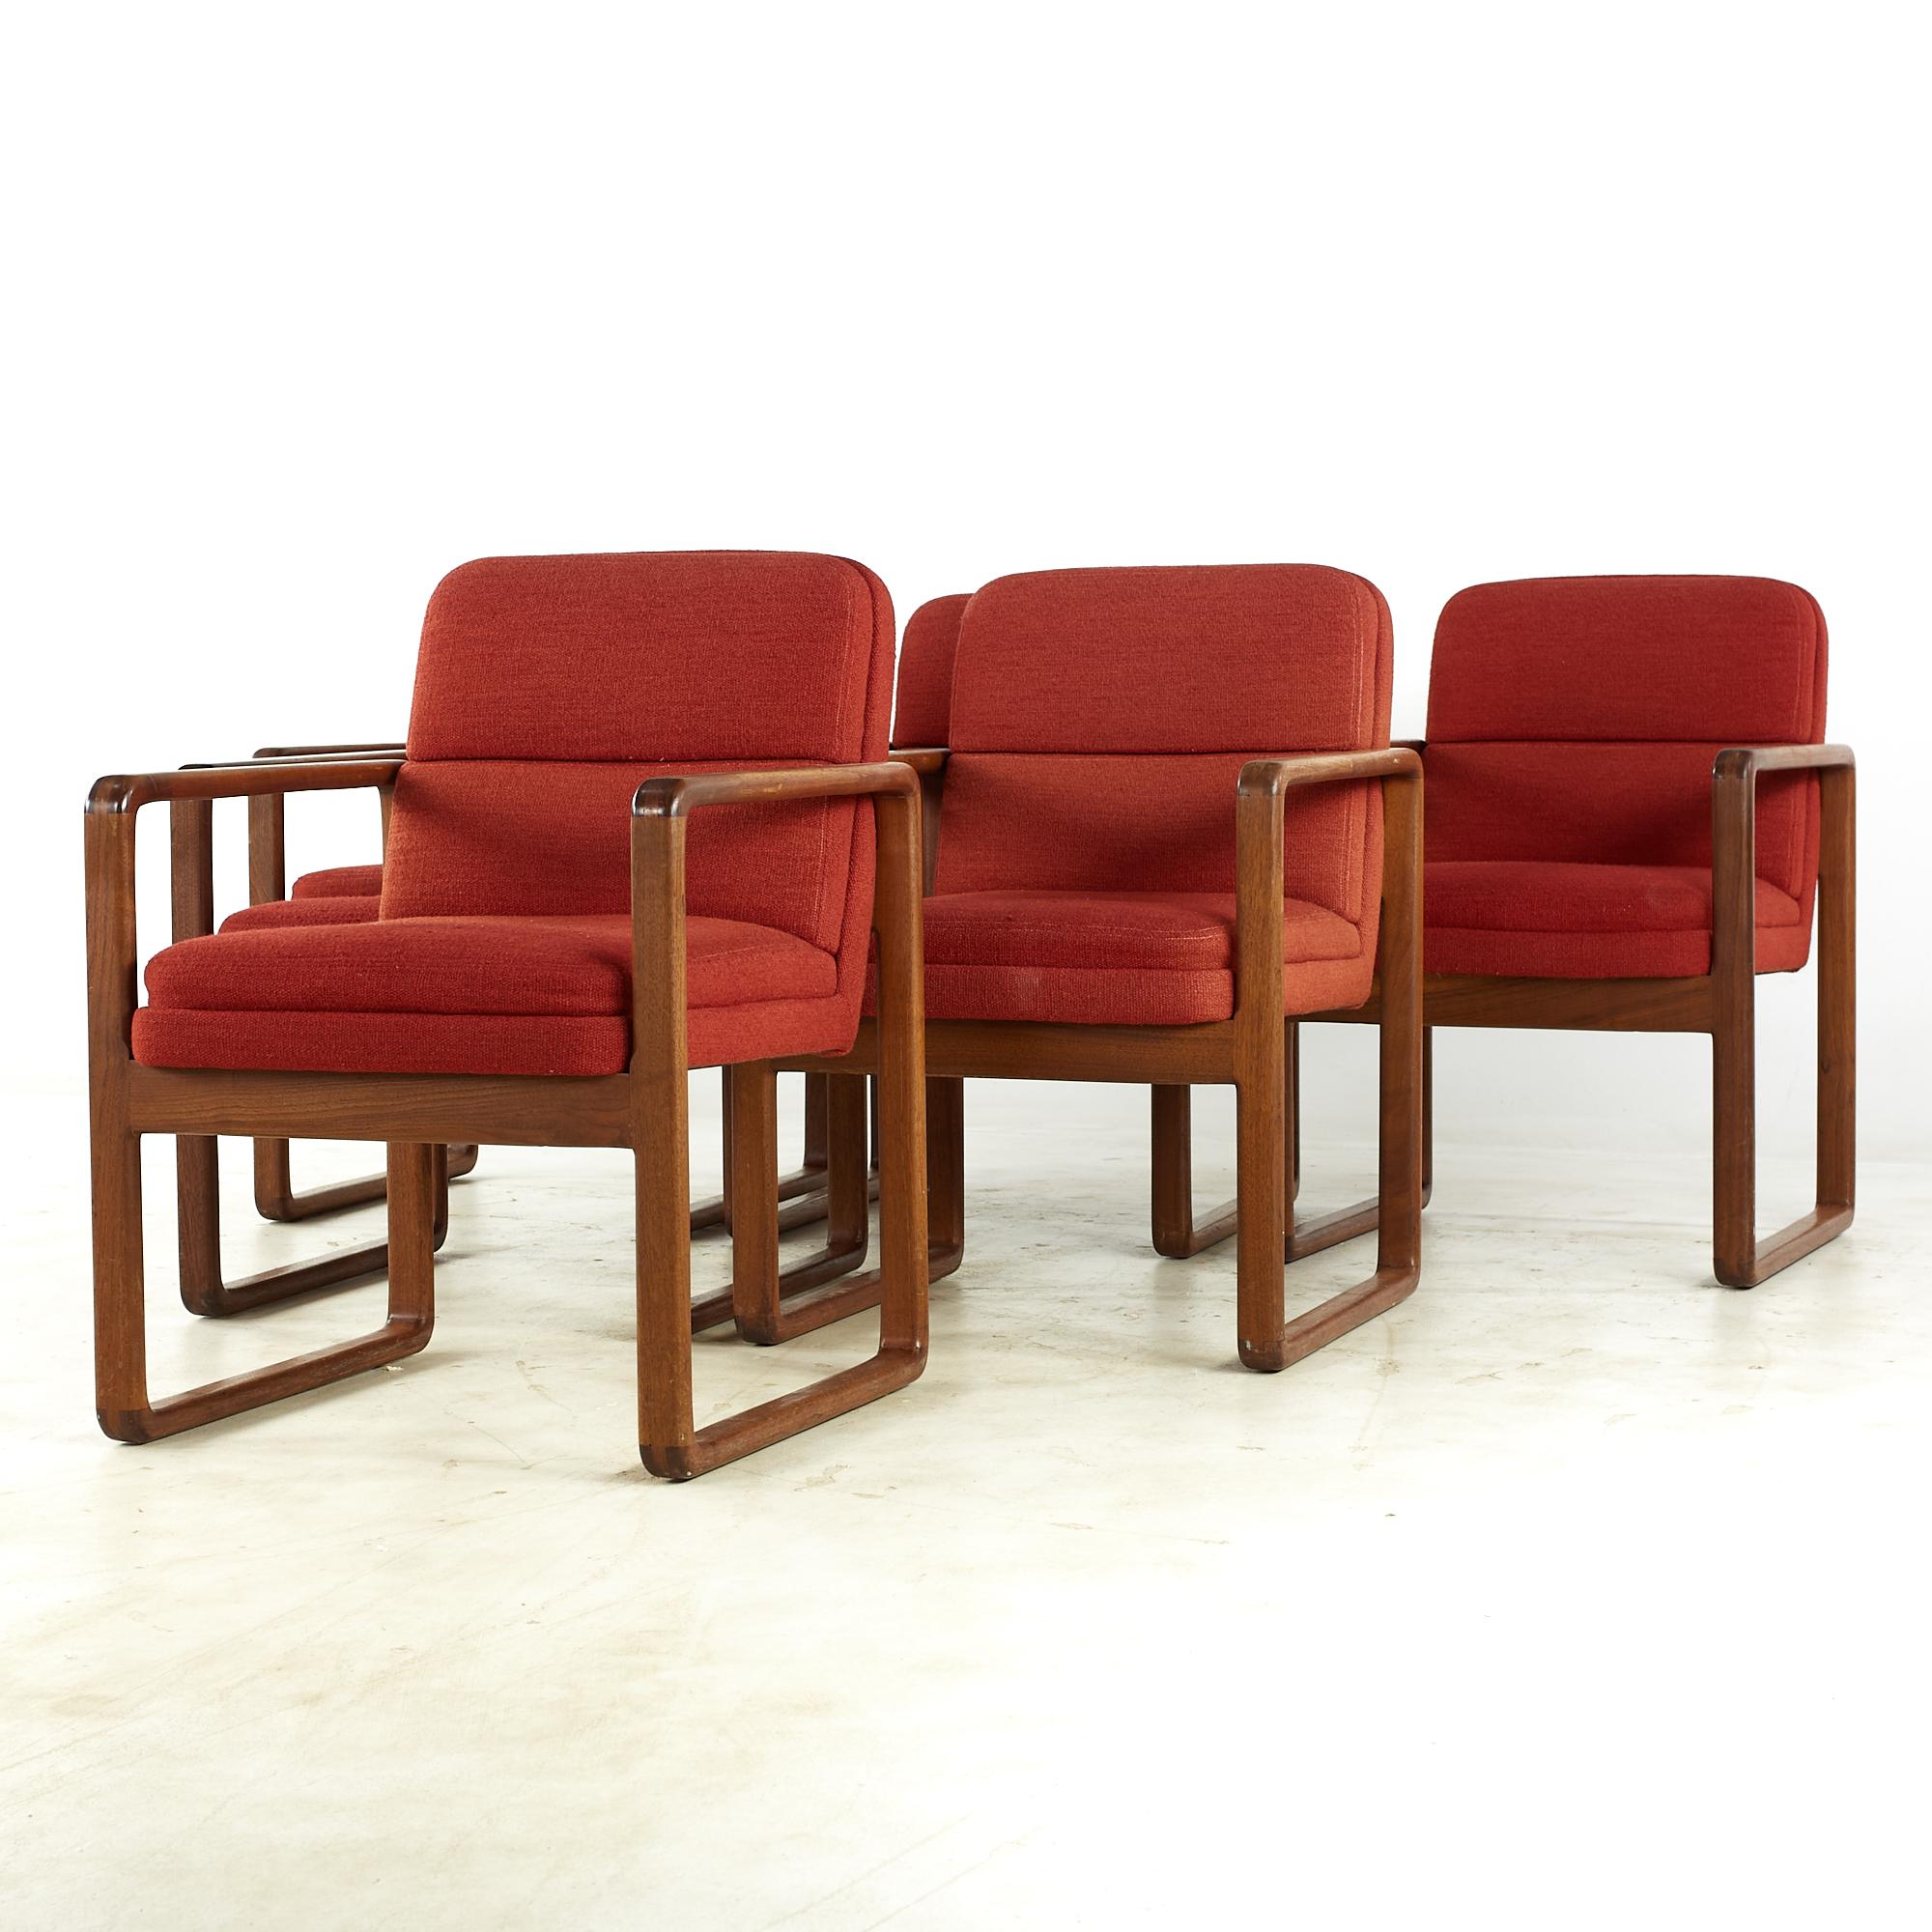 Mid-Century Modern Milo Baughman Style Midcentury Oak Dining Chairs, Set of 6 For Sale